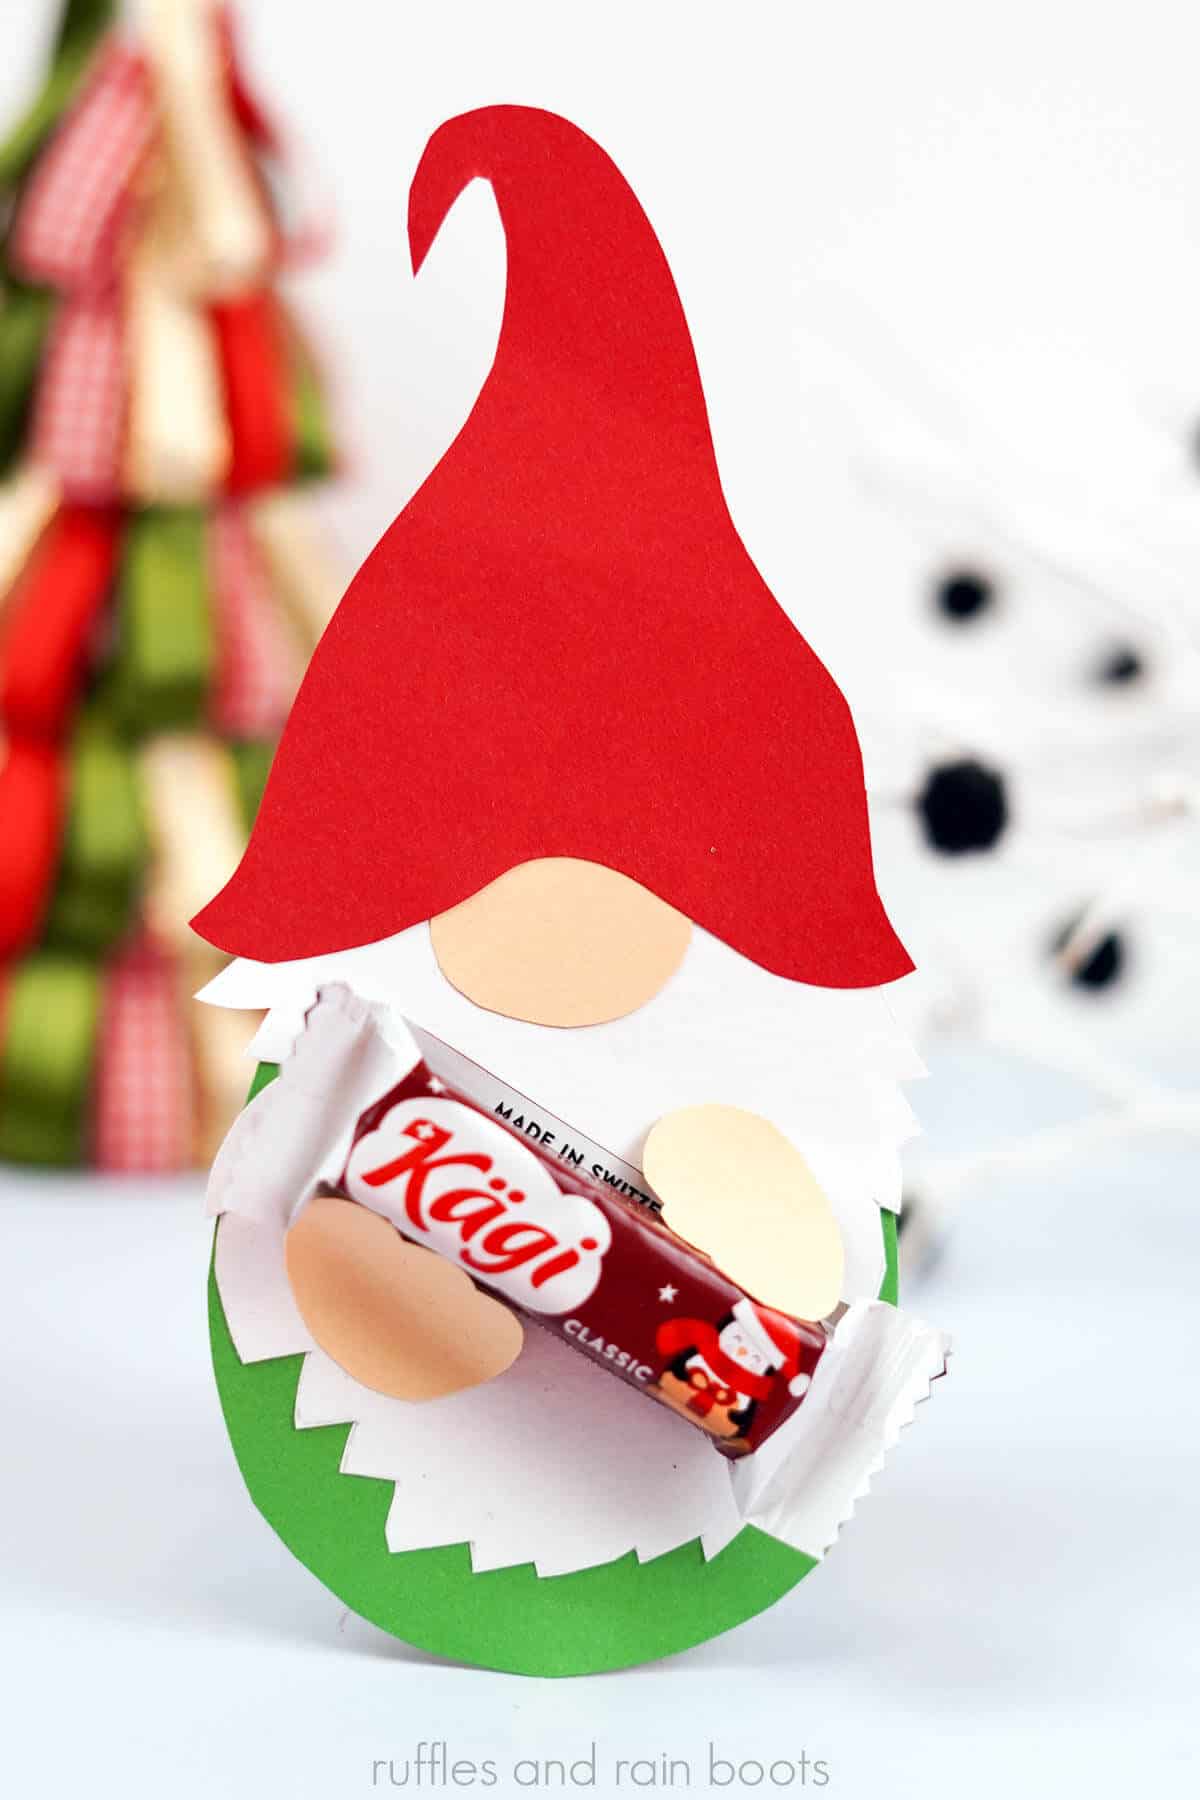 Close up vertical image of a paper gnome with red hat, green body, and hands holding a piece of chocolate.